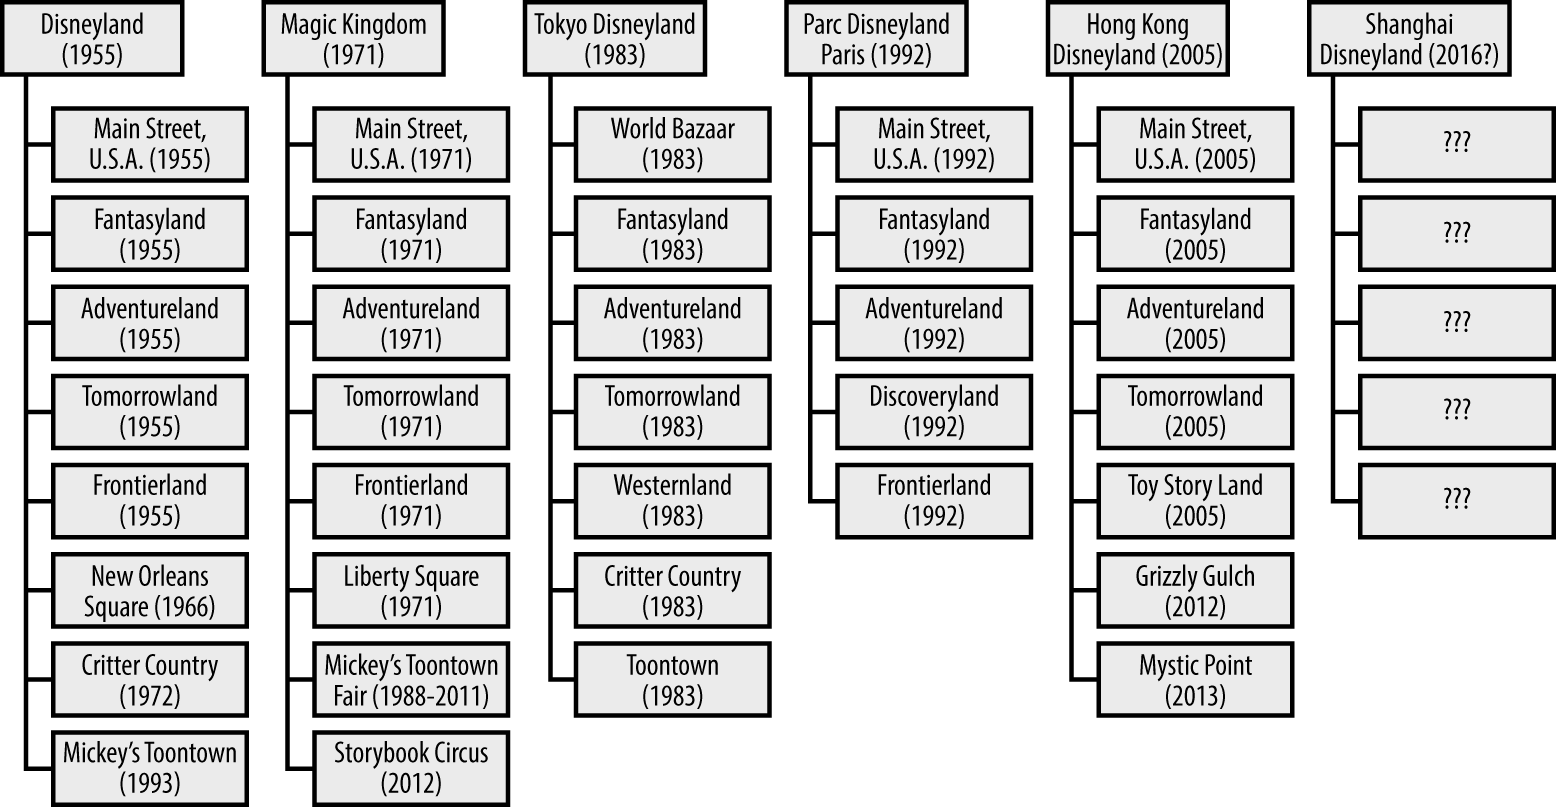 The conceptual structure of Disneyland parks allows coherence, extensibility, and adaptability to cultural and temporal context (note that Tokyo Disneyland’s Frontierland is called Westernland, and that Hong Kong Disneyland doesn’t have one at all)